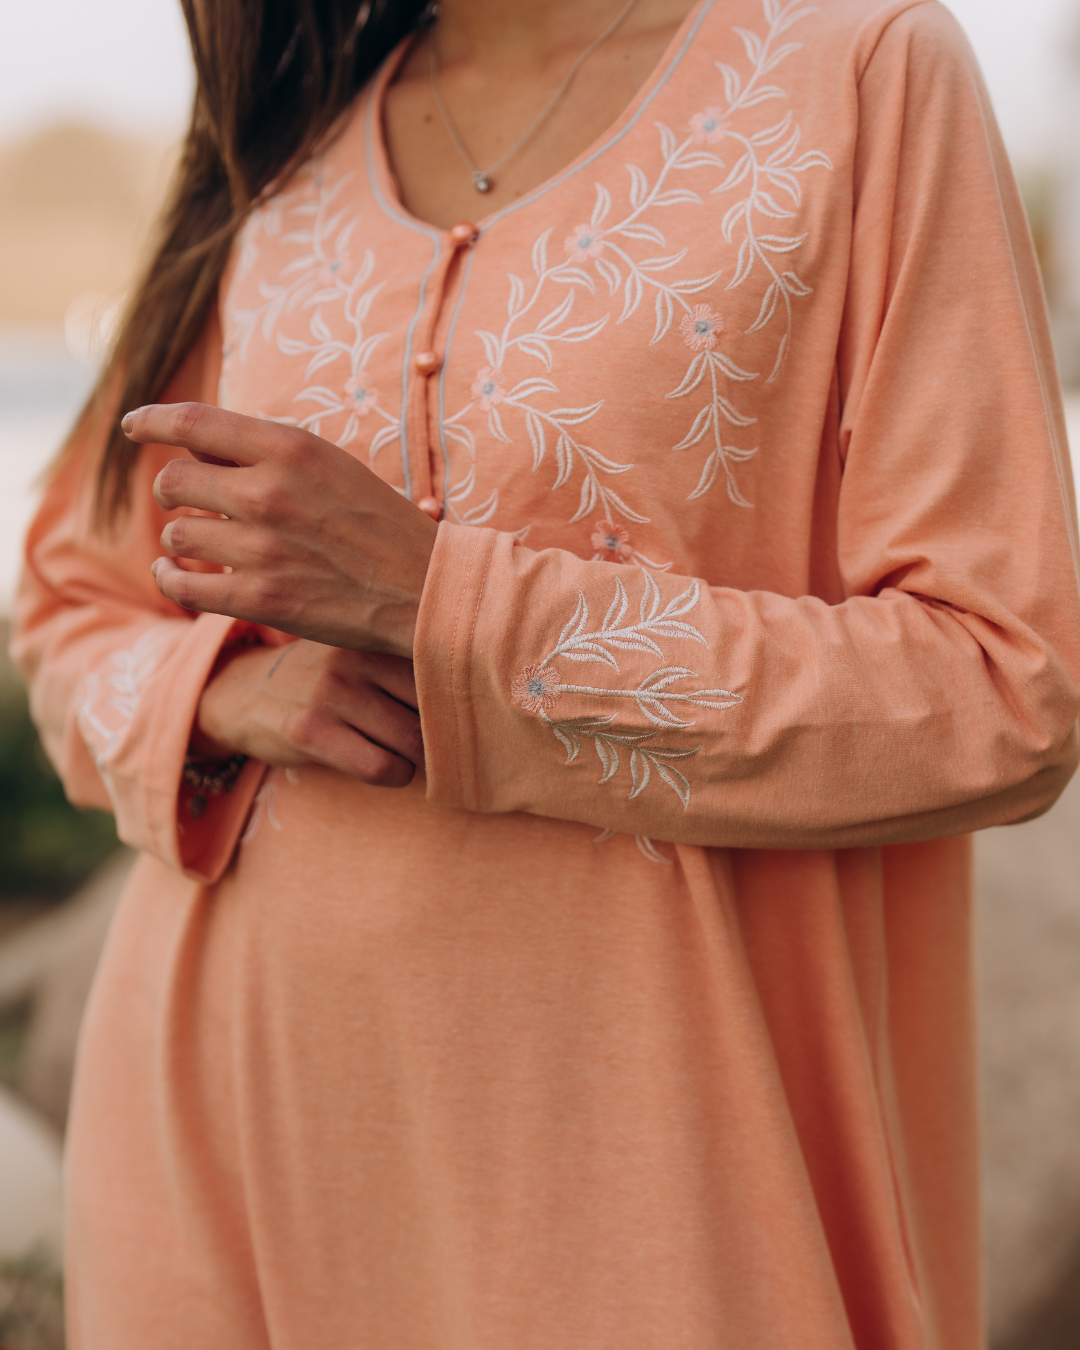 Women's shirt with rhubarb sleeves, buttons embroidered with branches